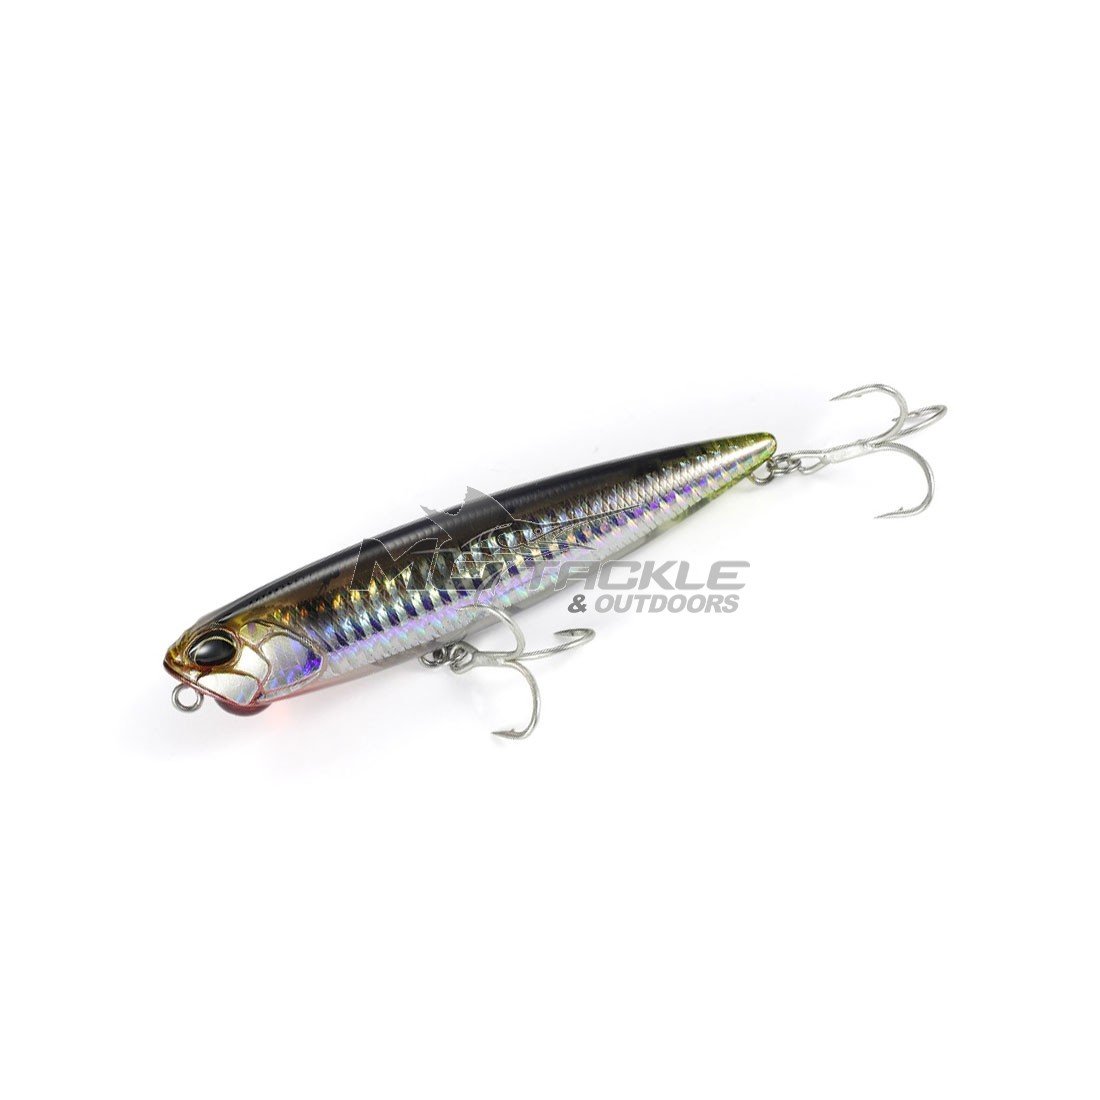 Duo Realis Pencil 130 SW Lure